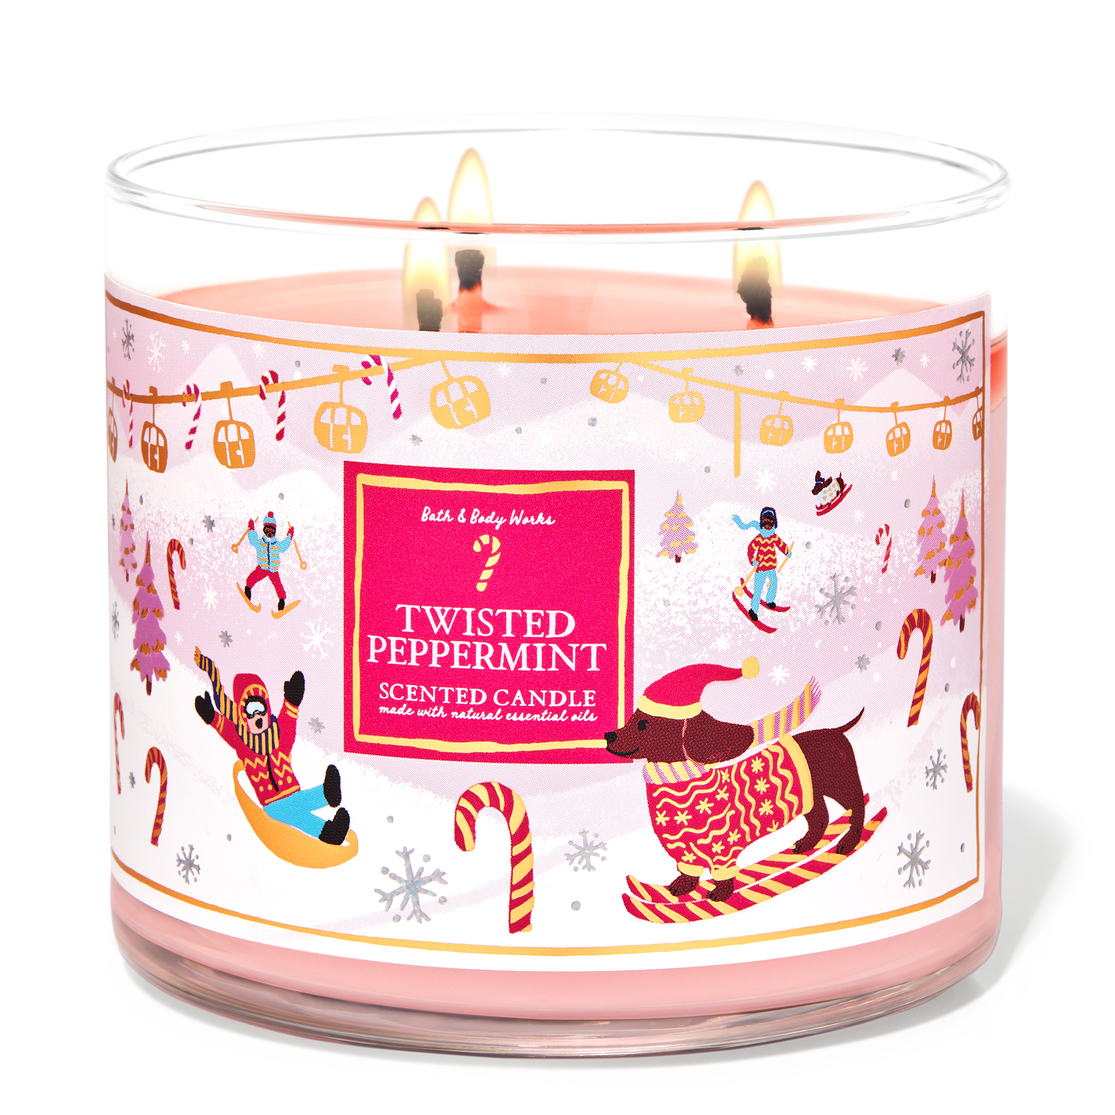 Bath and body works свечи. Bath and body works Twisted Peppermint Candle. Twisted Peppermint Bath and body works. Twisted Peppermint. Bath body works свечи